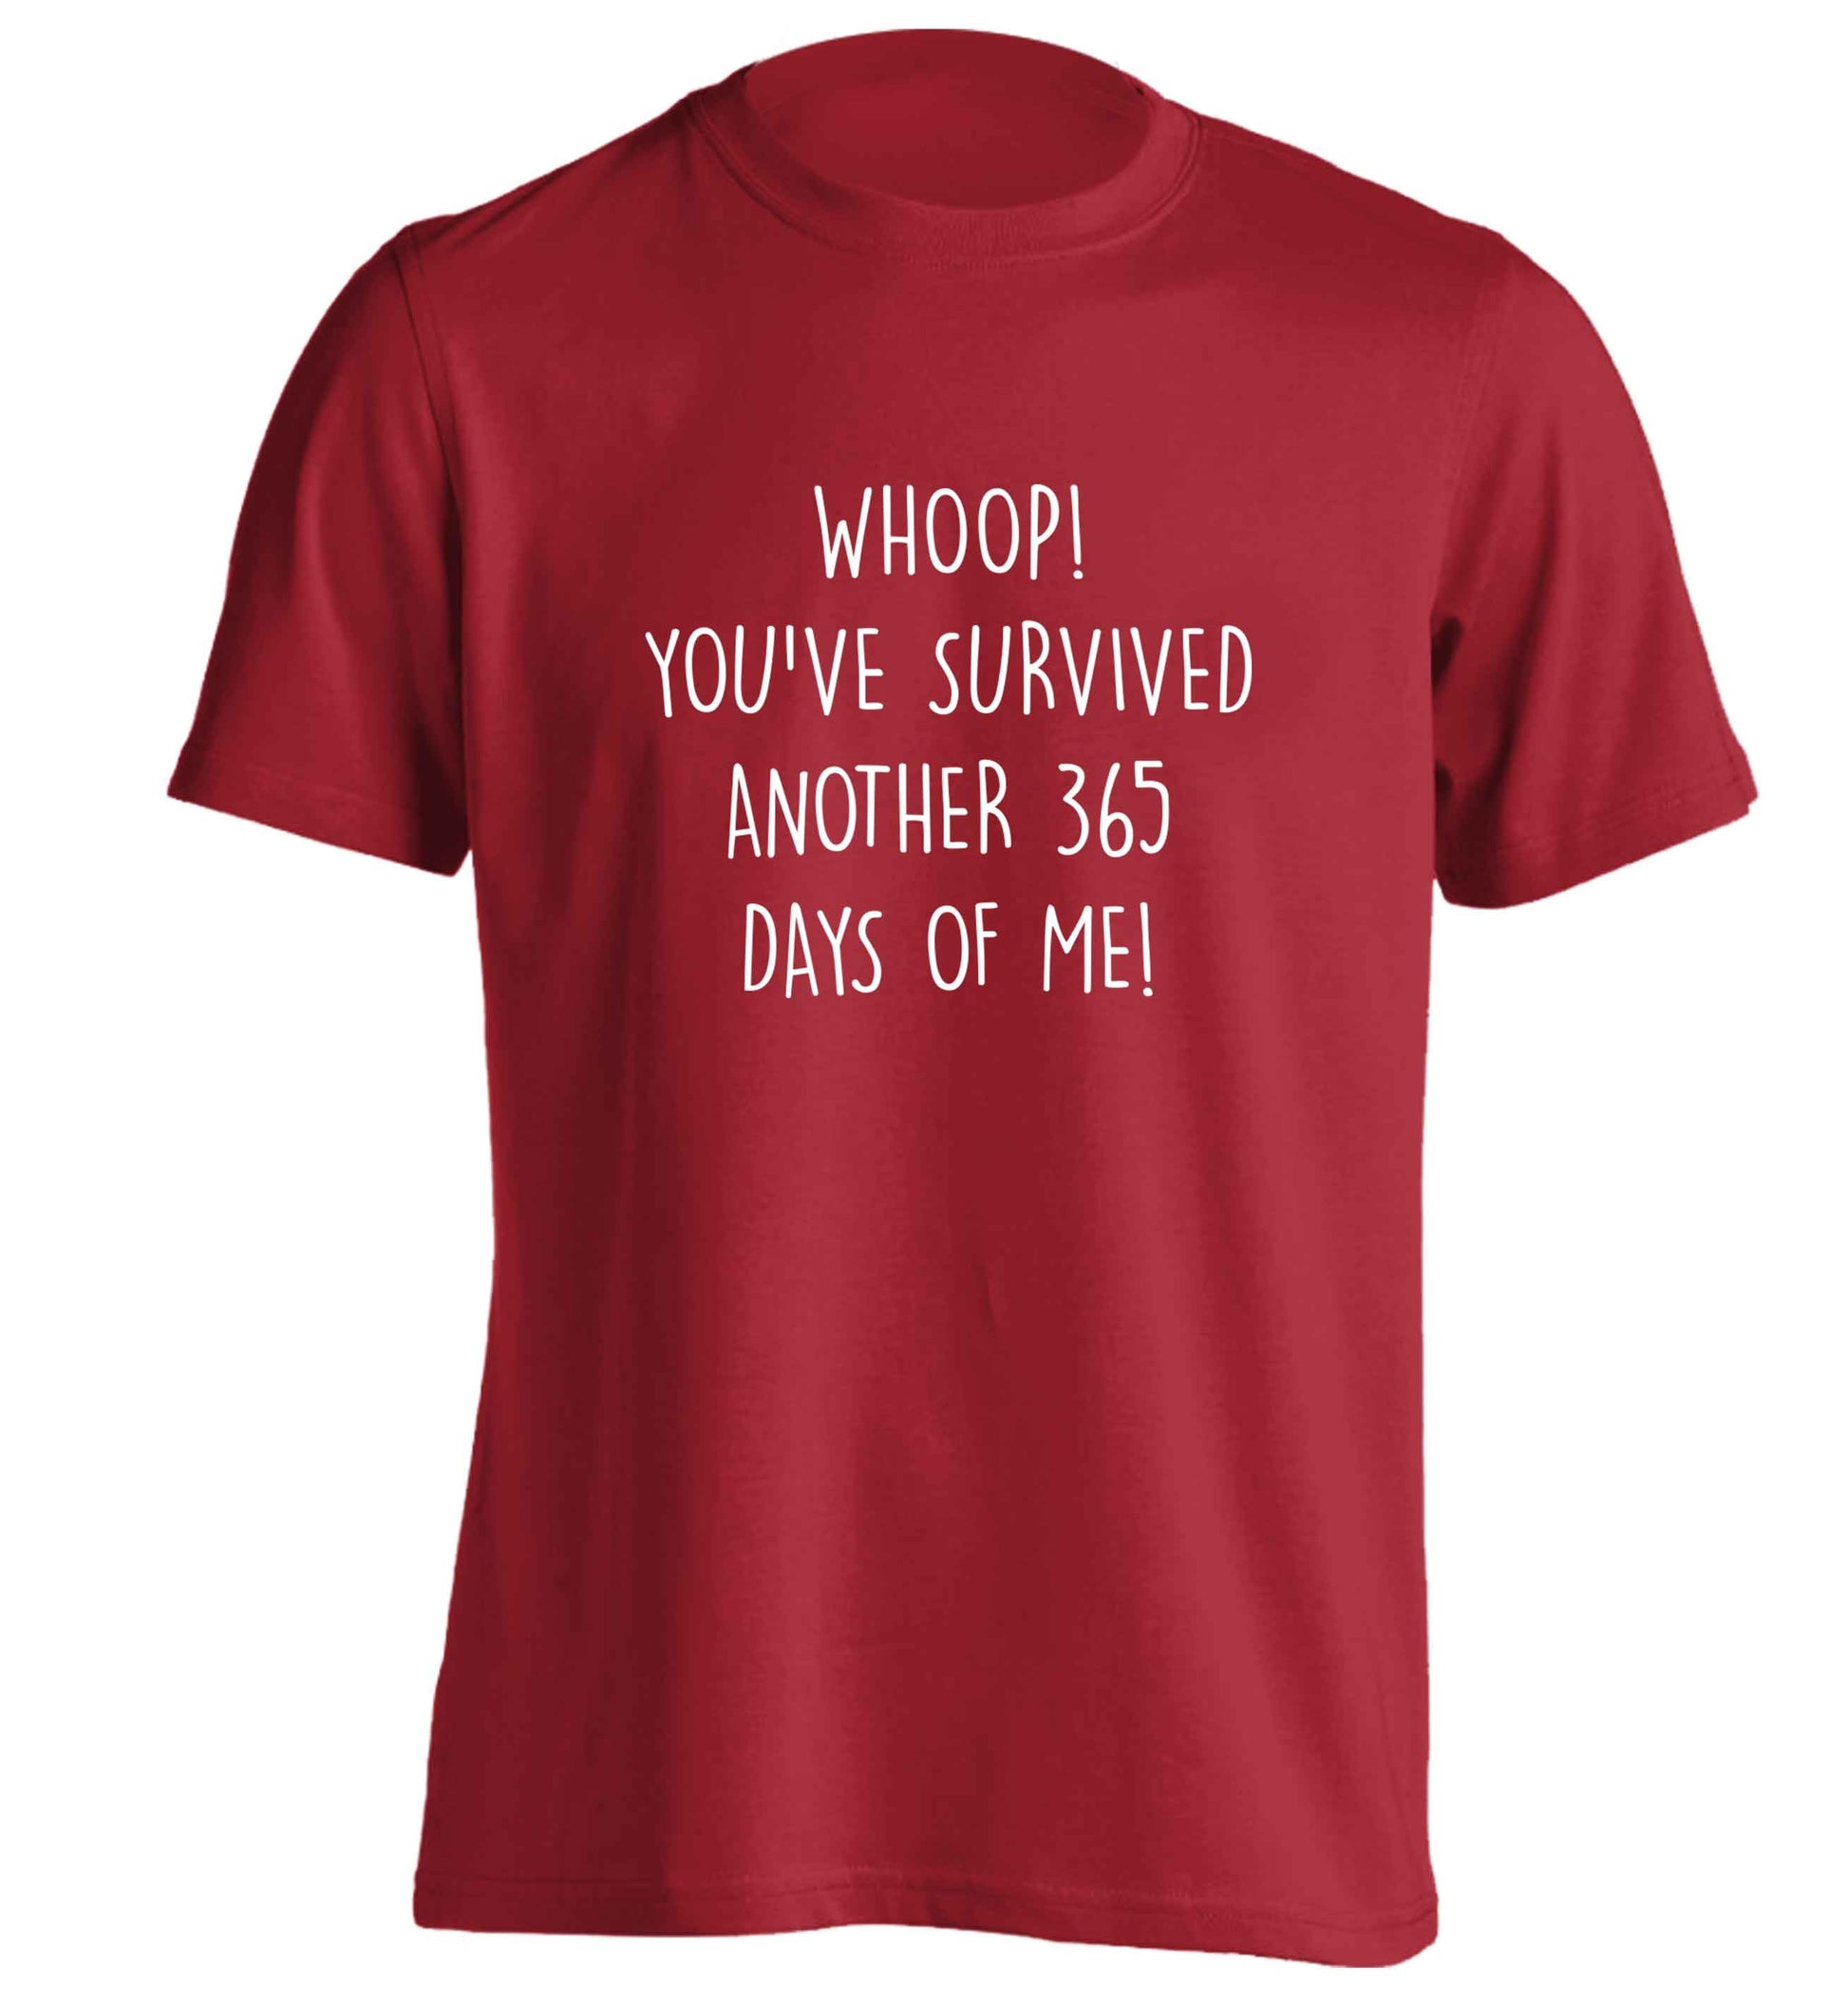 Whoop! You've survived another 365 days with me! adults unisex red Tshirt 2XL